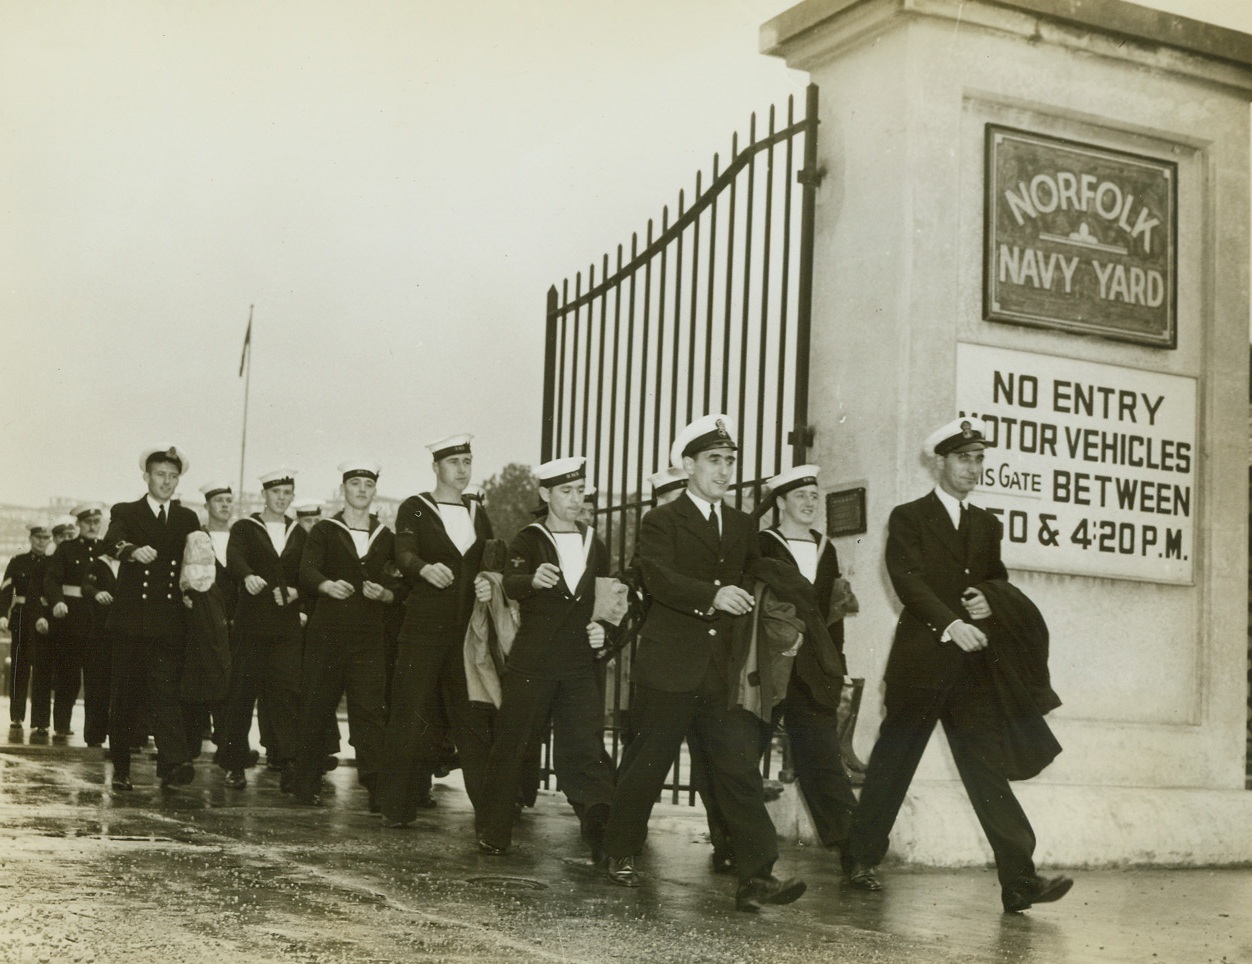 BRITISH SAILORS HARVEST AMERICAN CORPS, 10/23/1942. English sailors on leave from a British man o’war in a U.S. Navy Yard for refitting, lend a hand to Virginia truck and dairy farmers beset by a shortage of manpower.  Here a group of sailors march from the Navy Yard en route to do their bit of farm work.Credit: Acme;